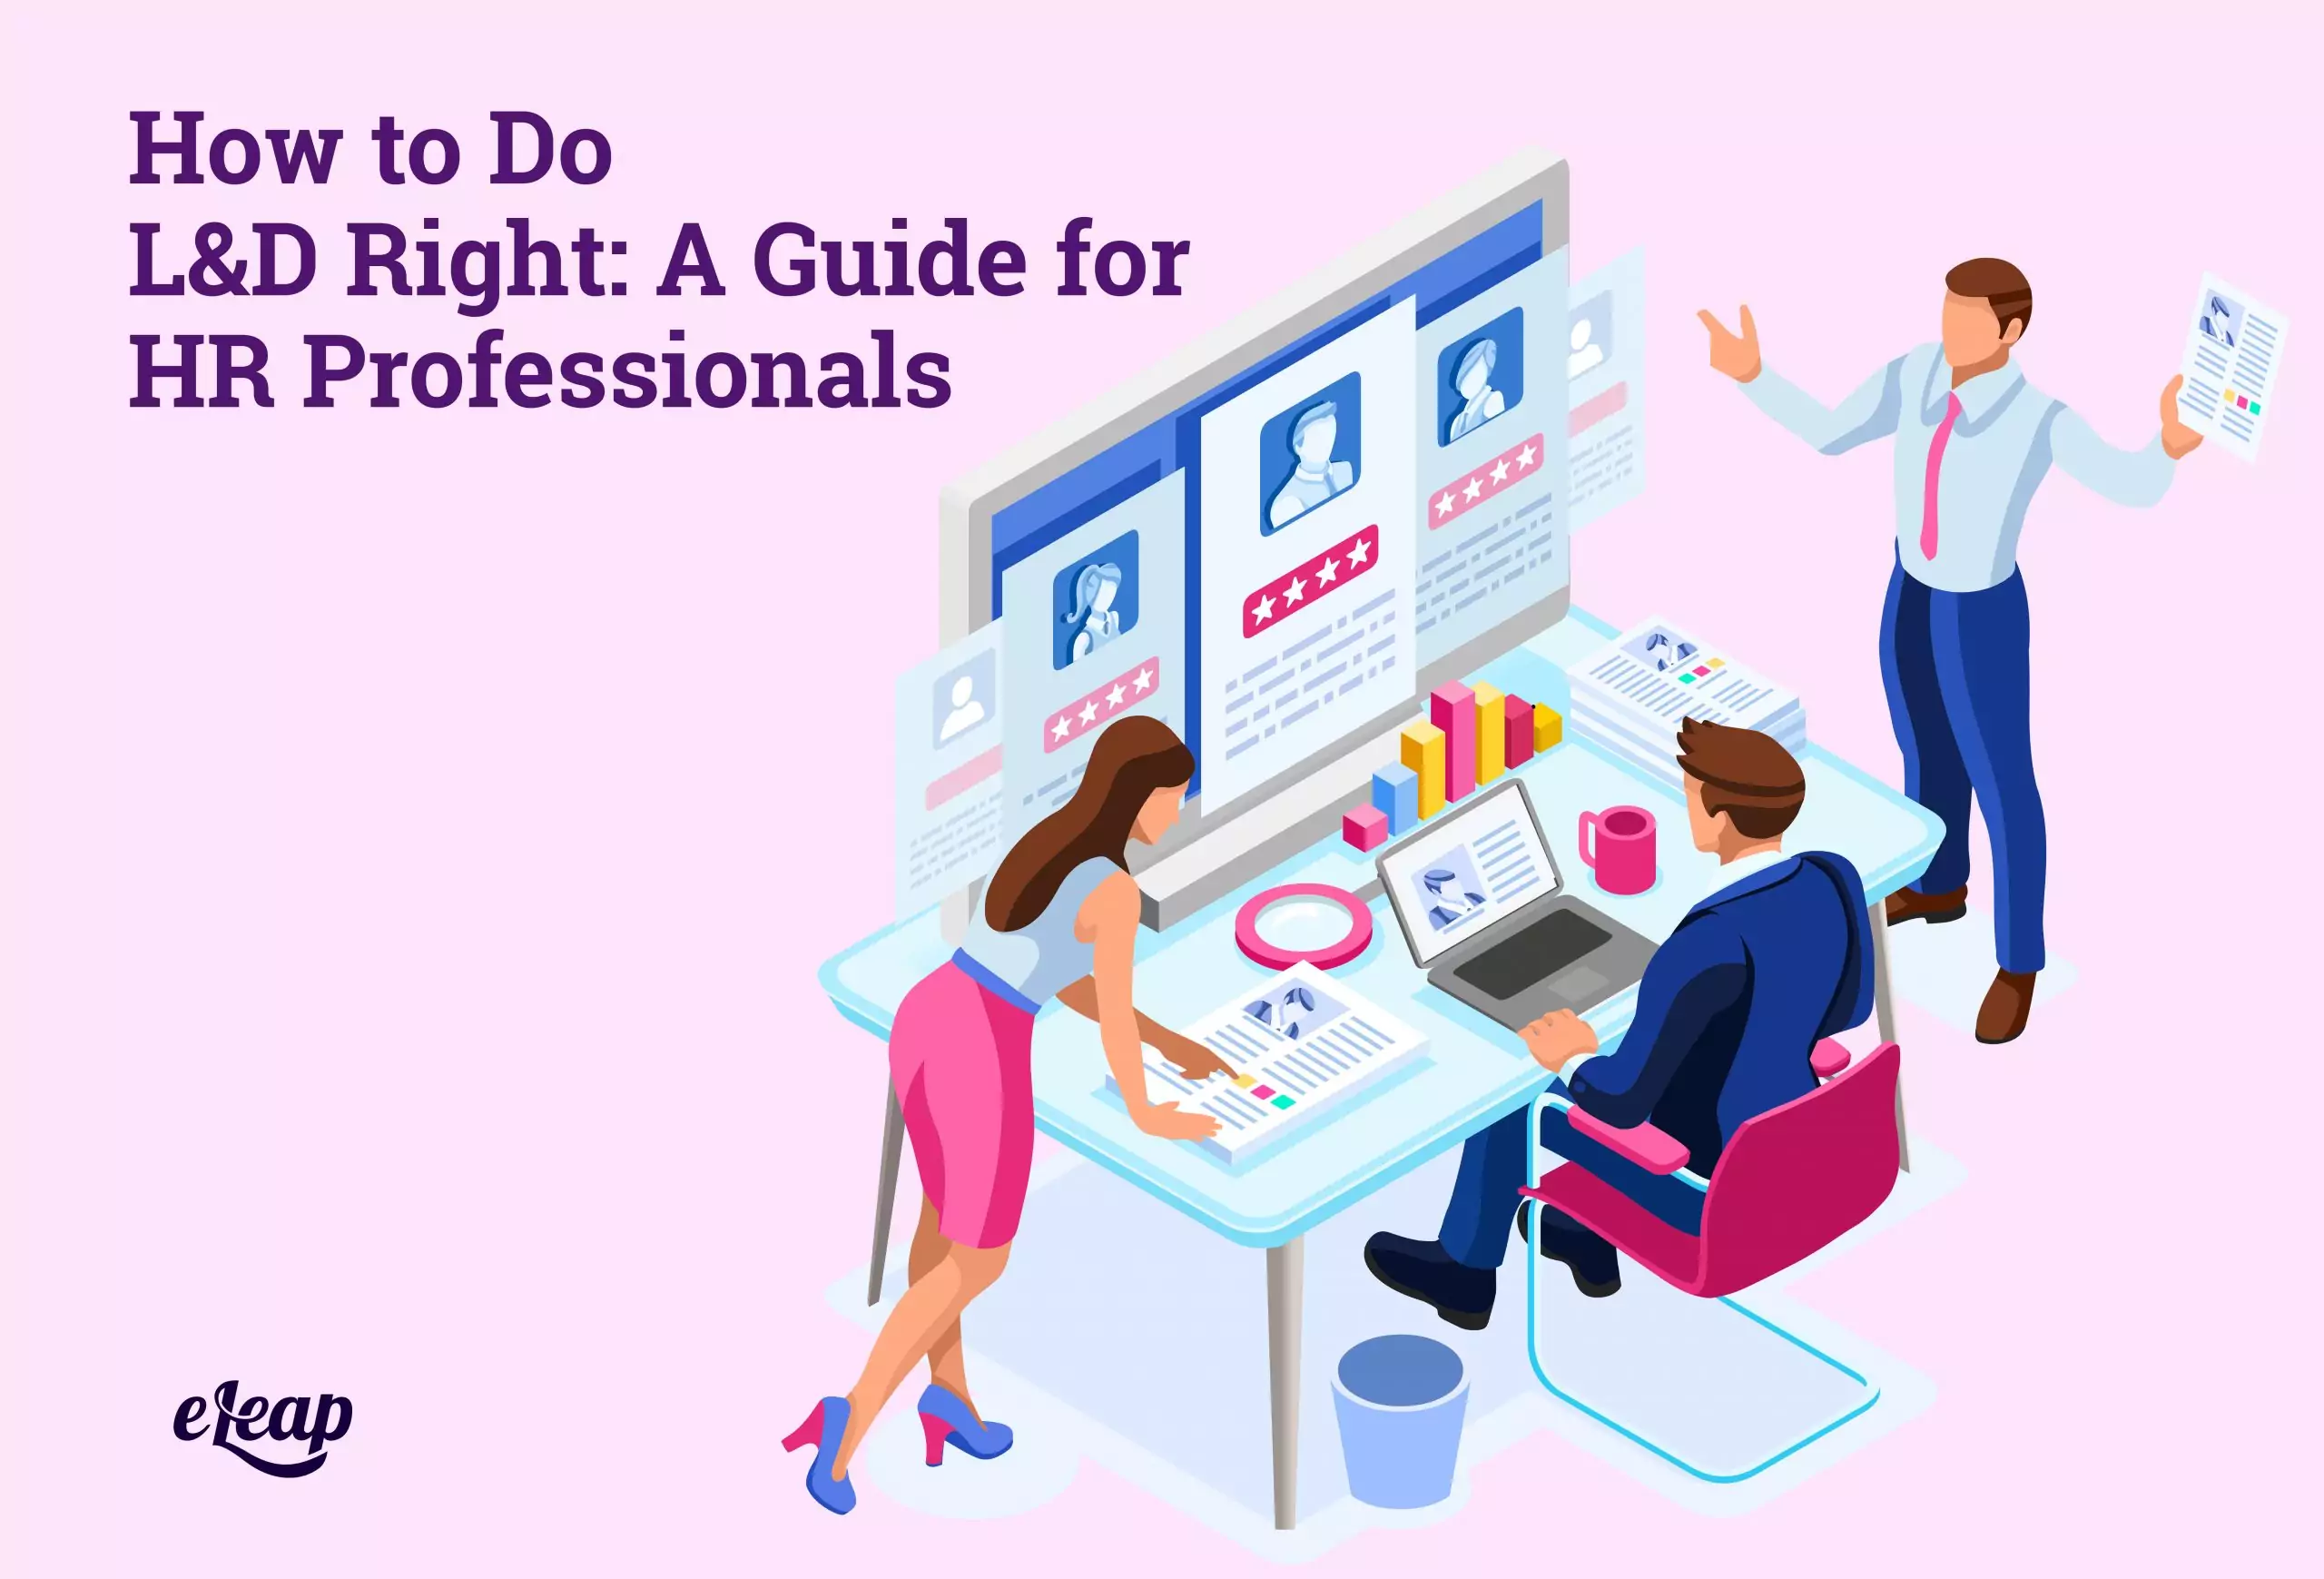 How to Do L&D Right: A Guide for HR Professionals